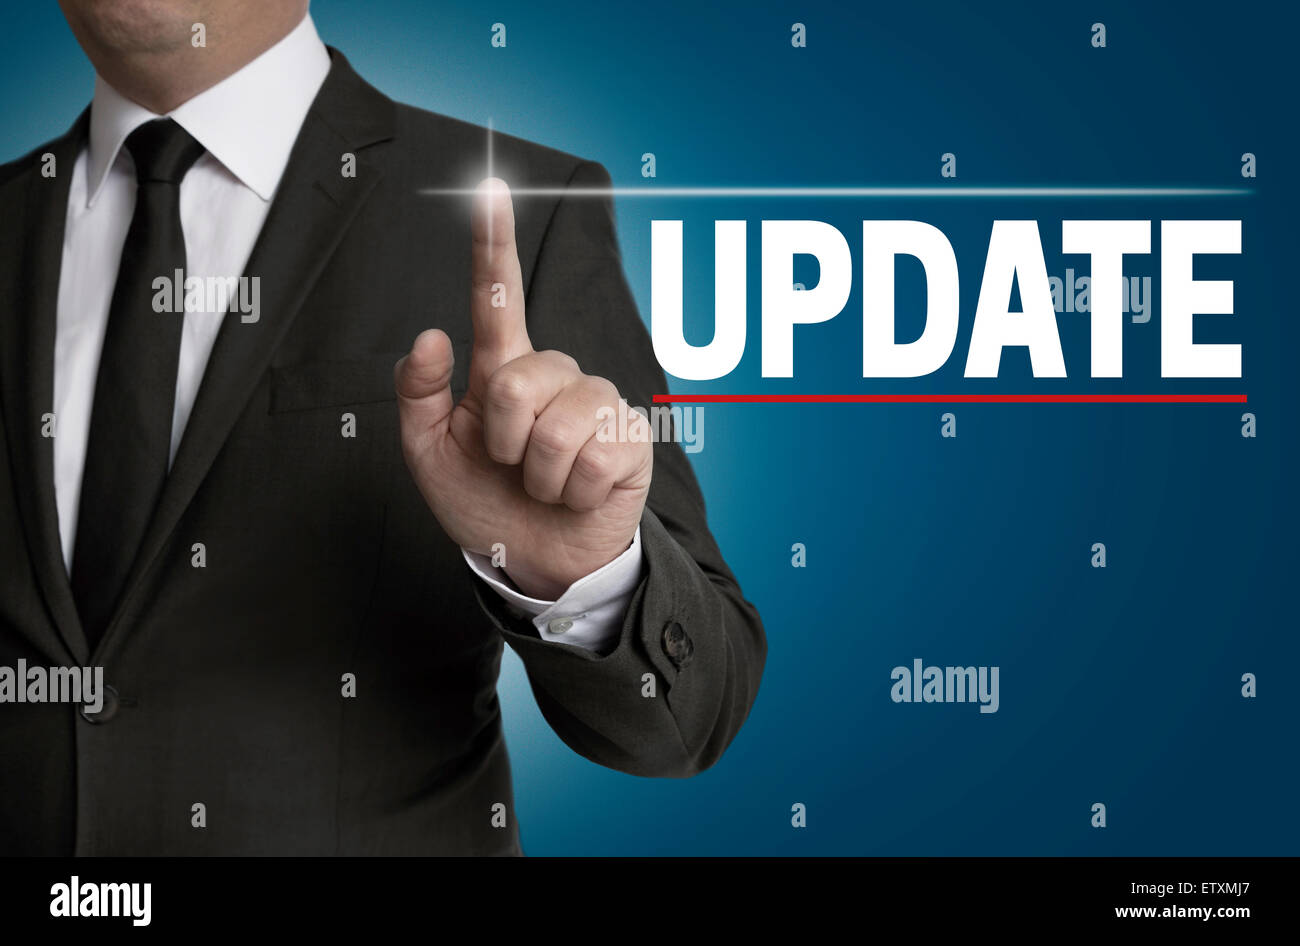 Update touchscreen is operated by businessman. Stock Photo